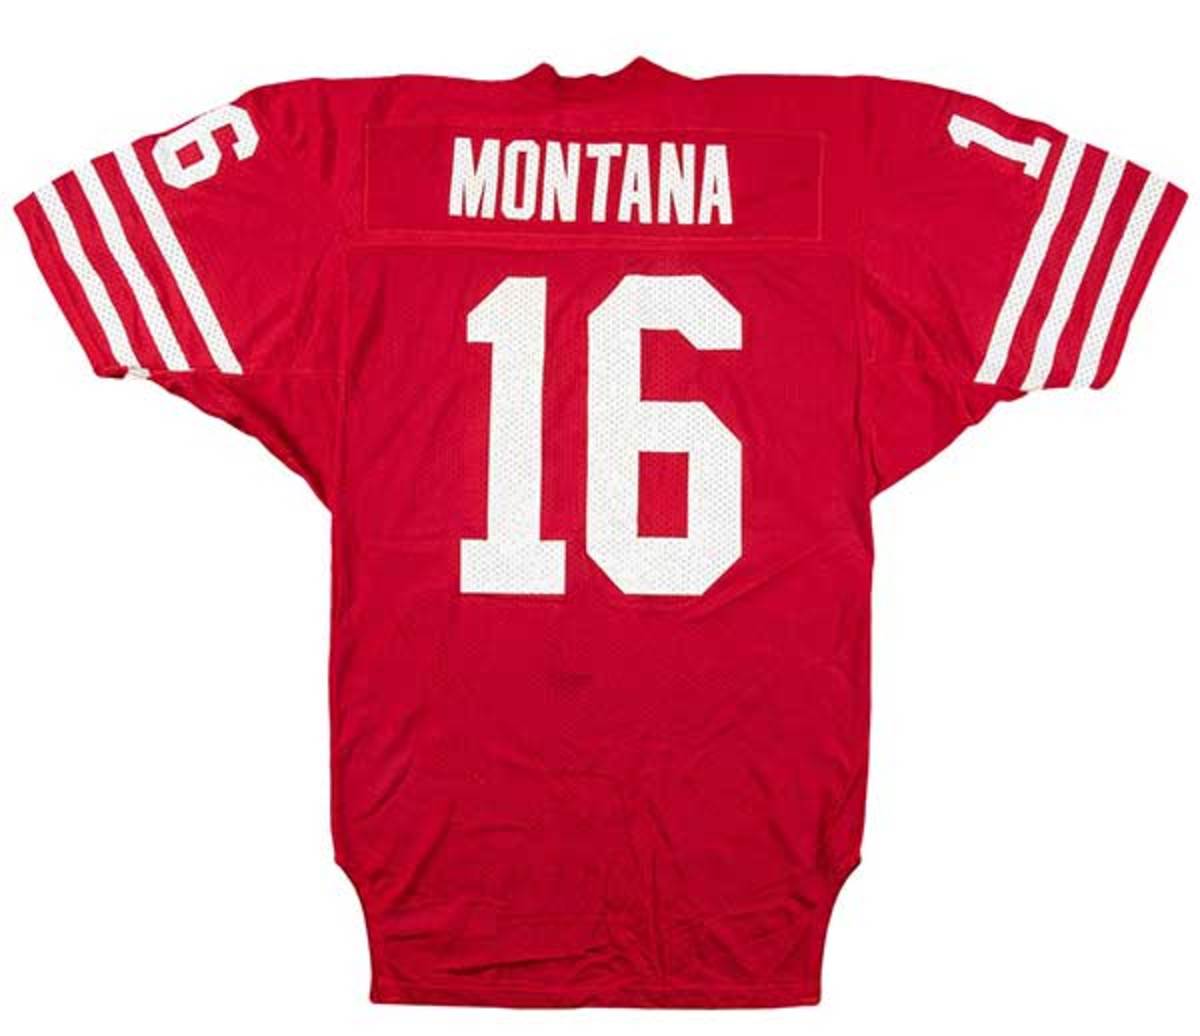 Montana-1985-and-1989-Super-Bowl-jersey